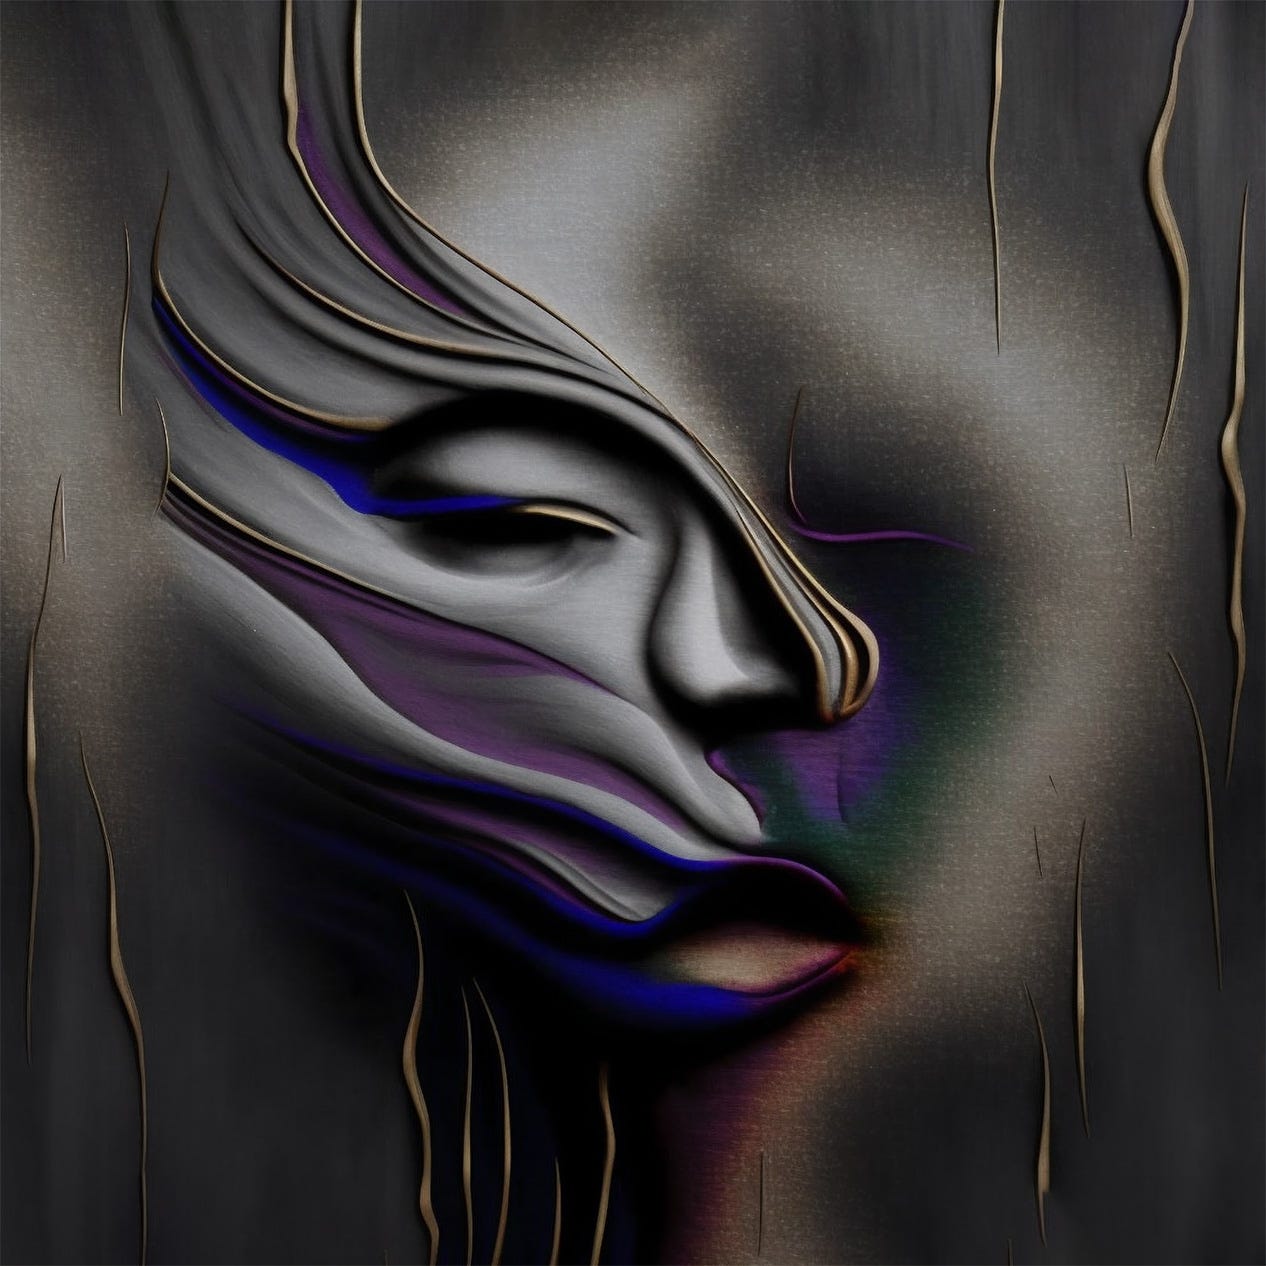 The blur of the beginning, an AI-generated, human-edited image of a face, blurred, emerging from the darkness among the roots. MJ prompt: a dark grey canvas, multi-color metallic powder, rising to form a subtle outline of a face in pain, abstract